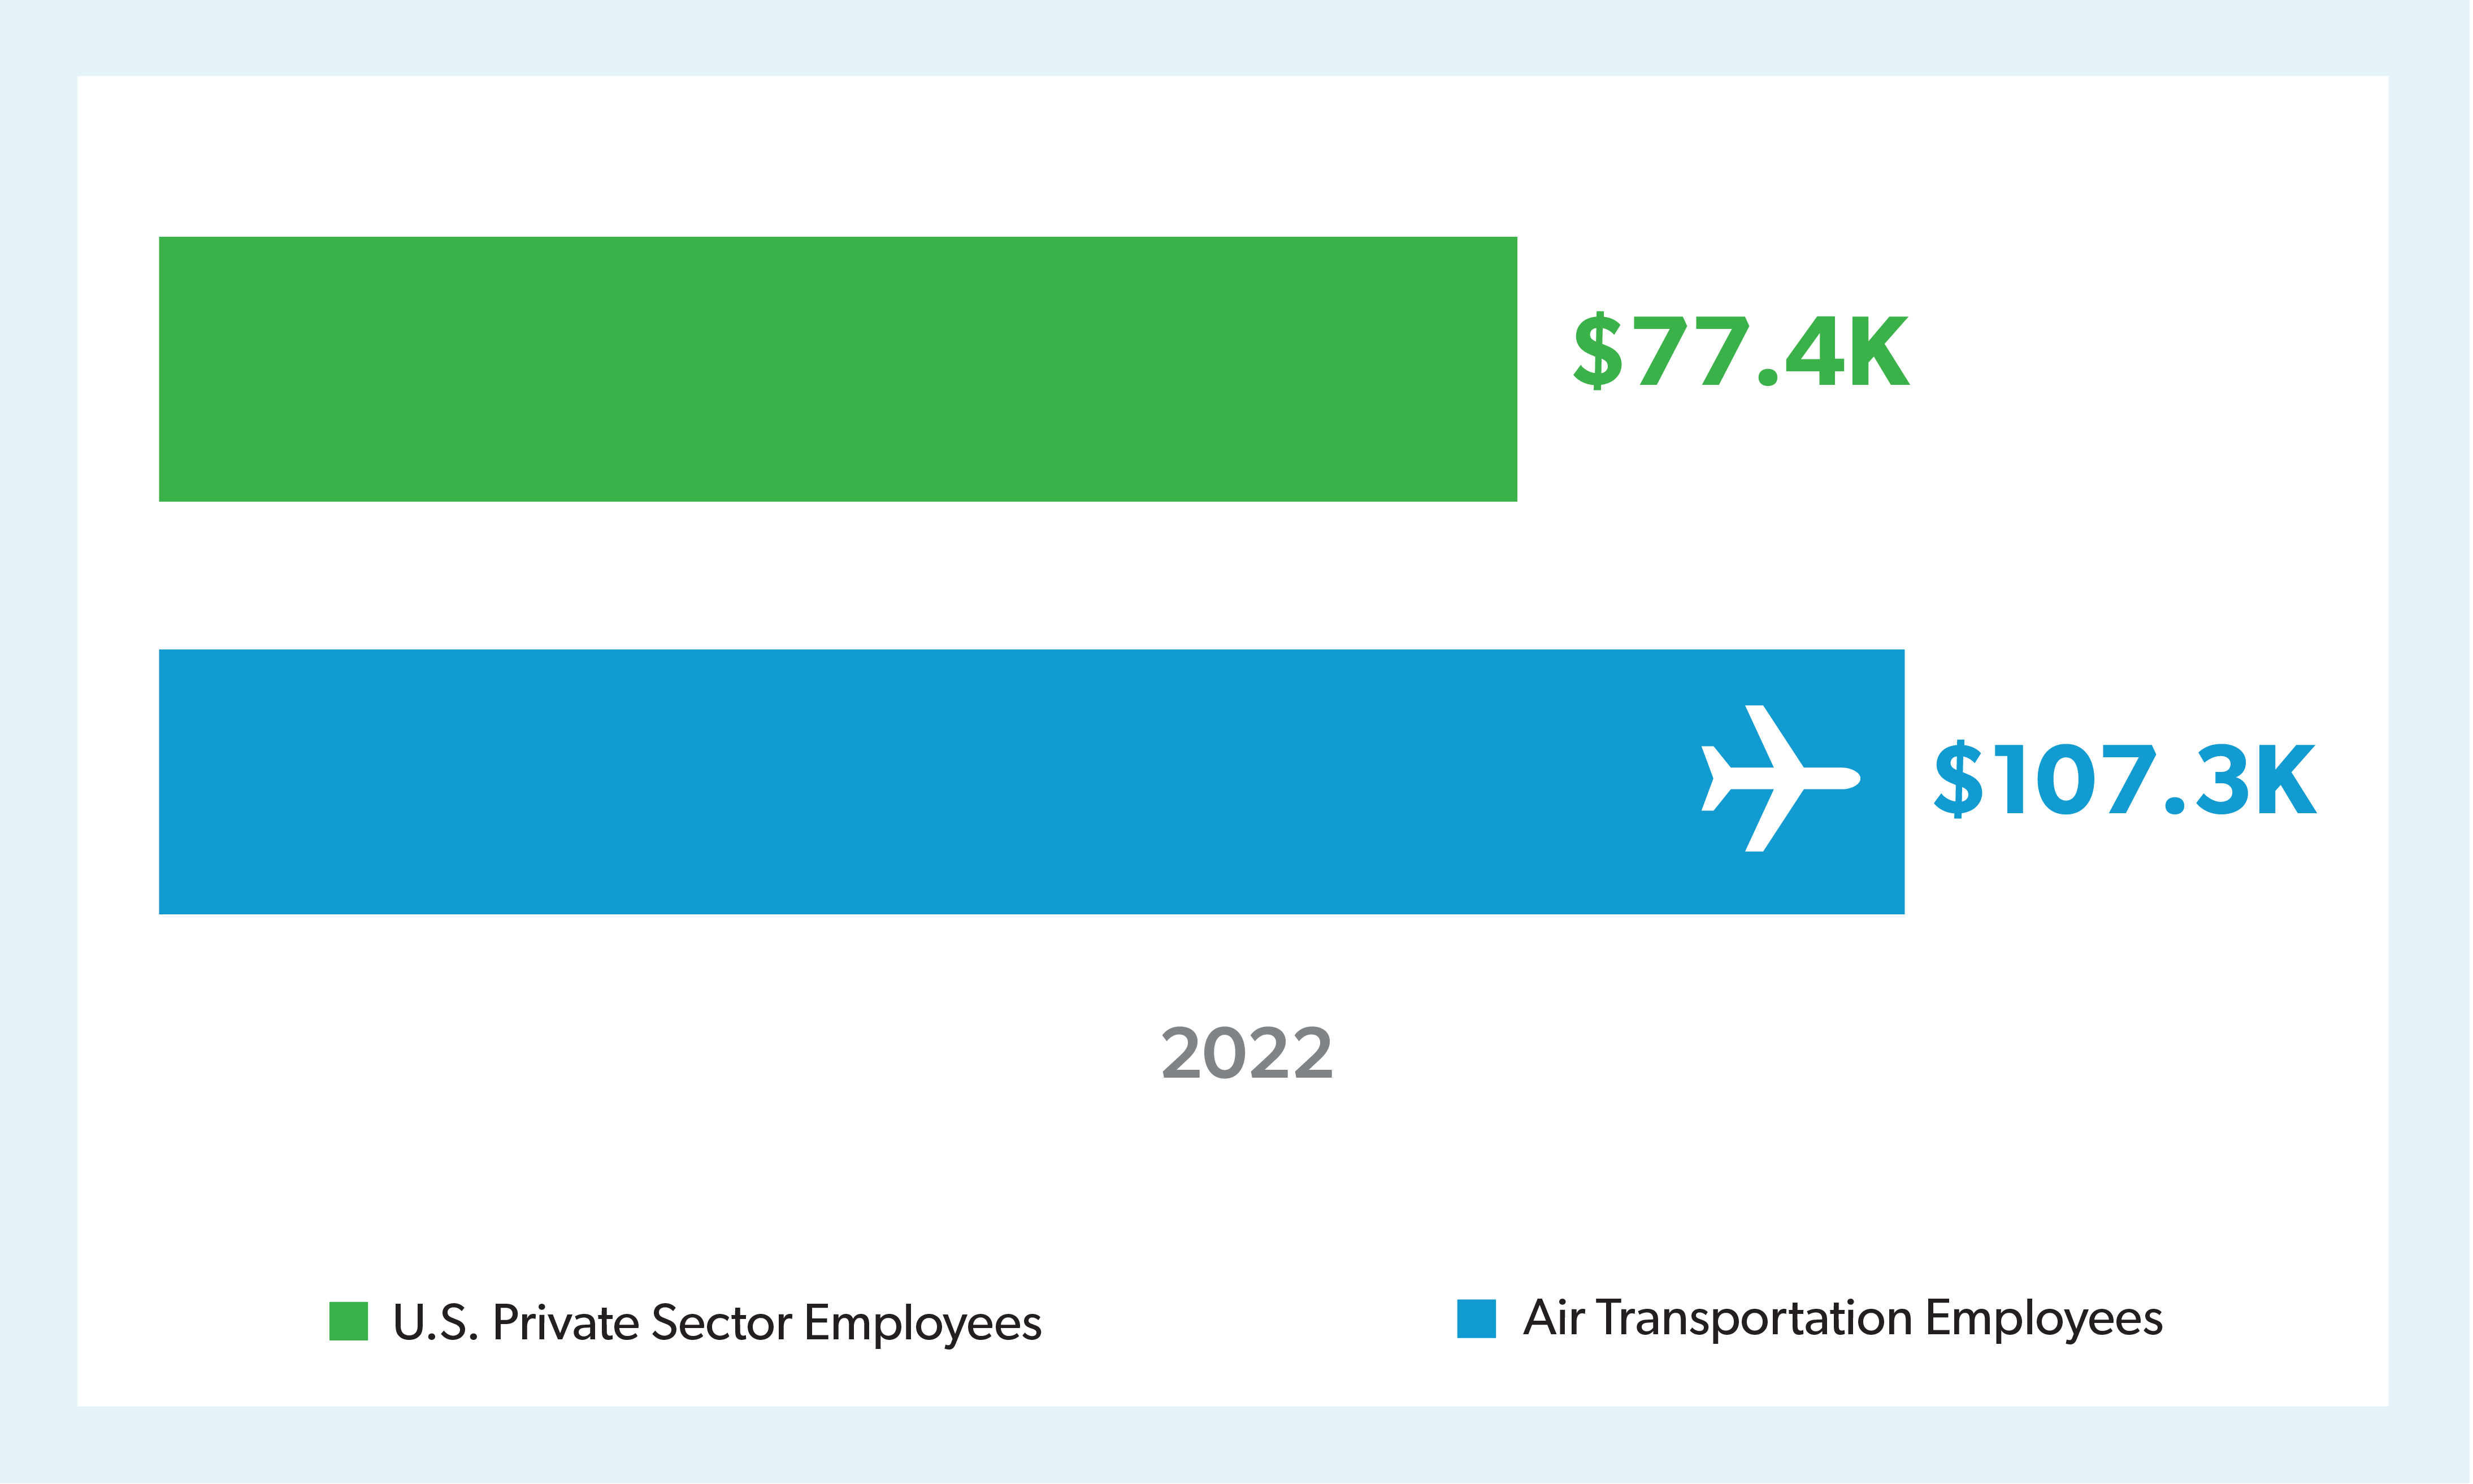 In 2022, Air Transportation Employees Earned Wages 39% Higher than the Average Private Sector Employee